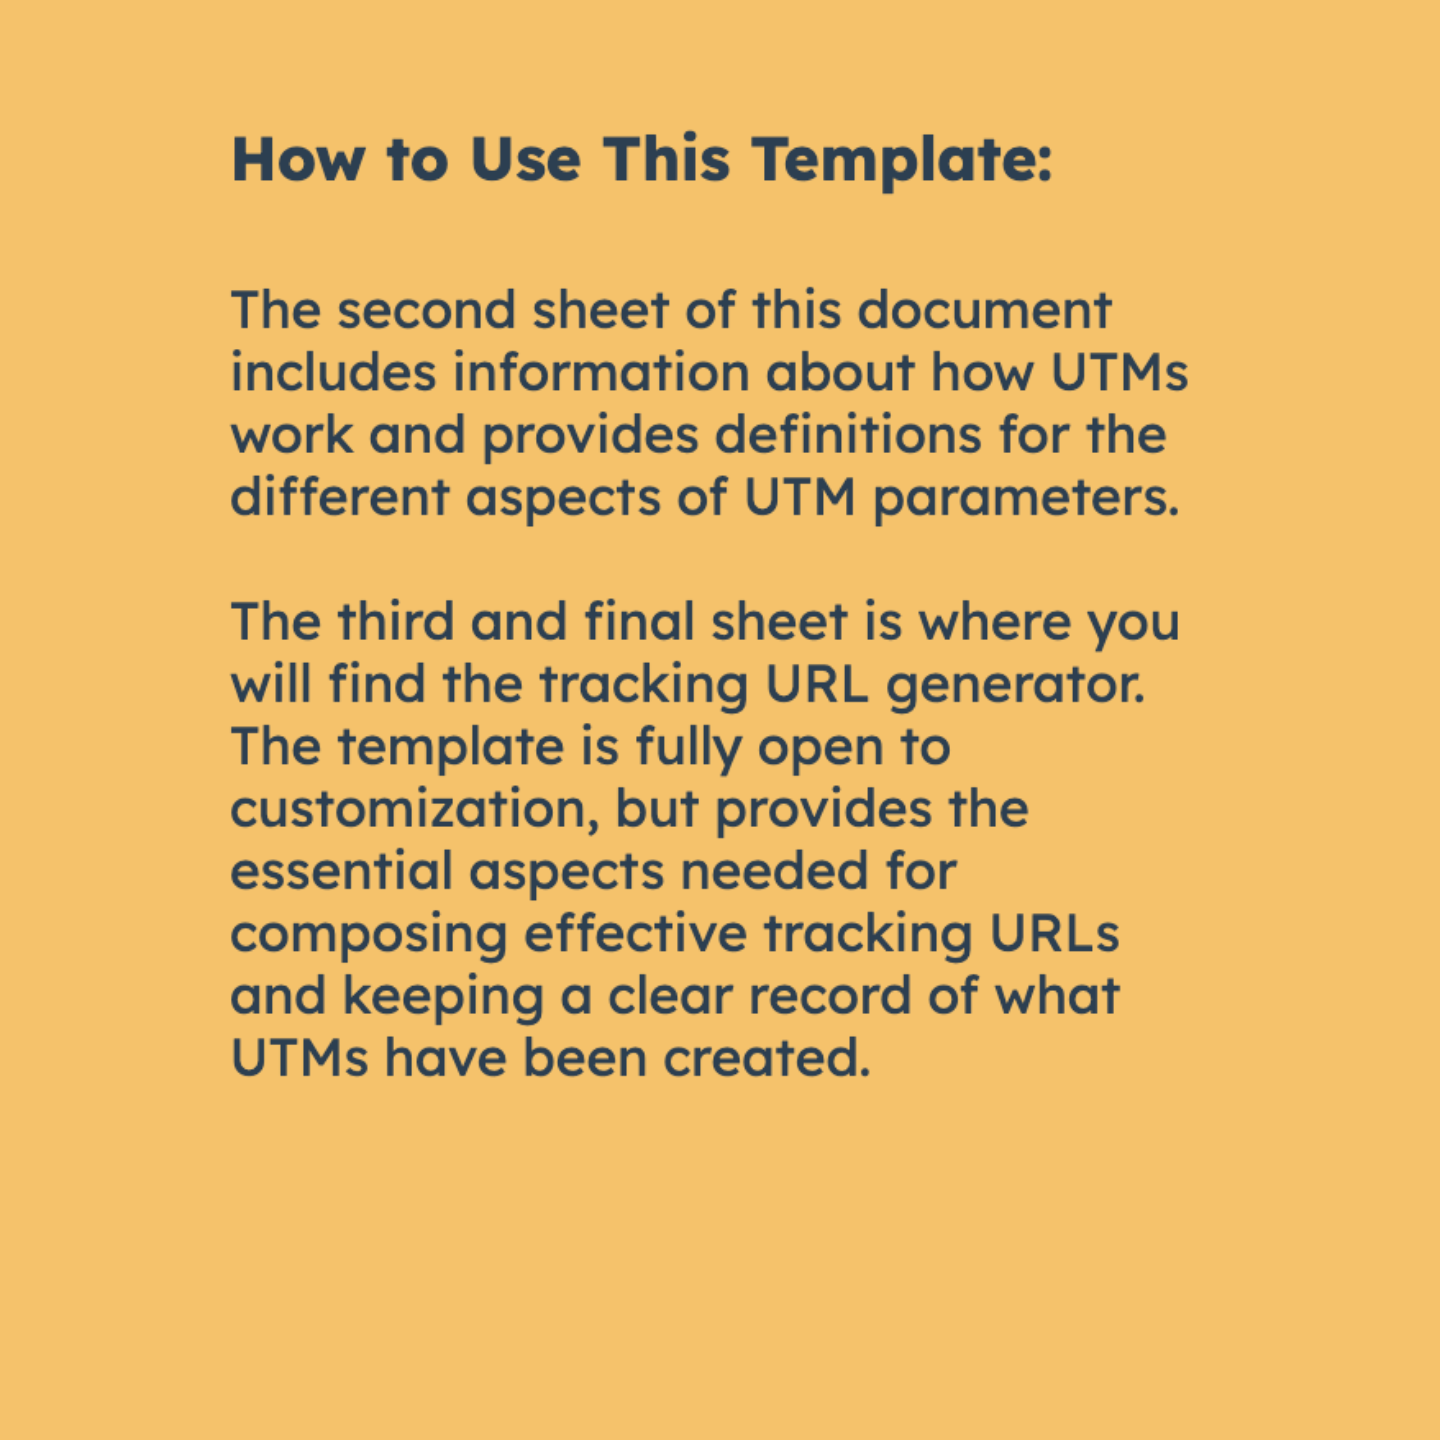 UTM Template - Instructions